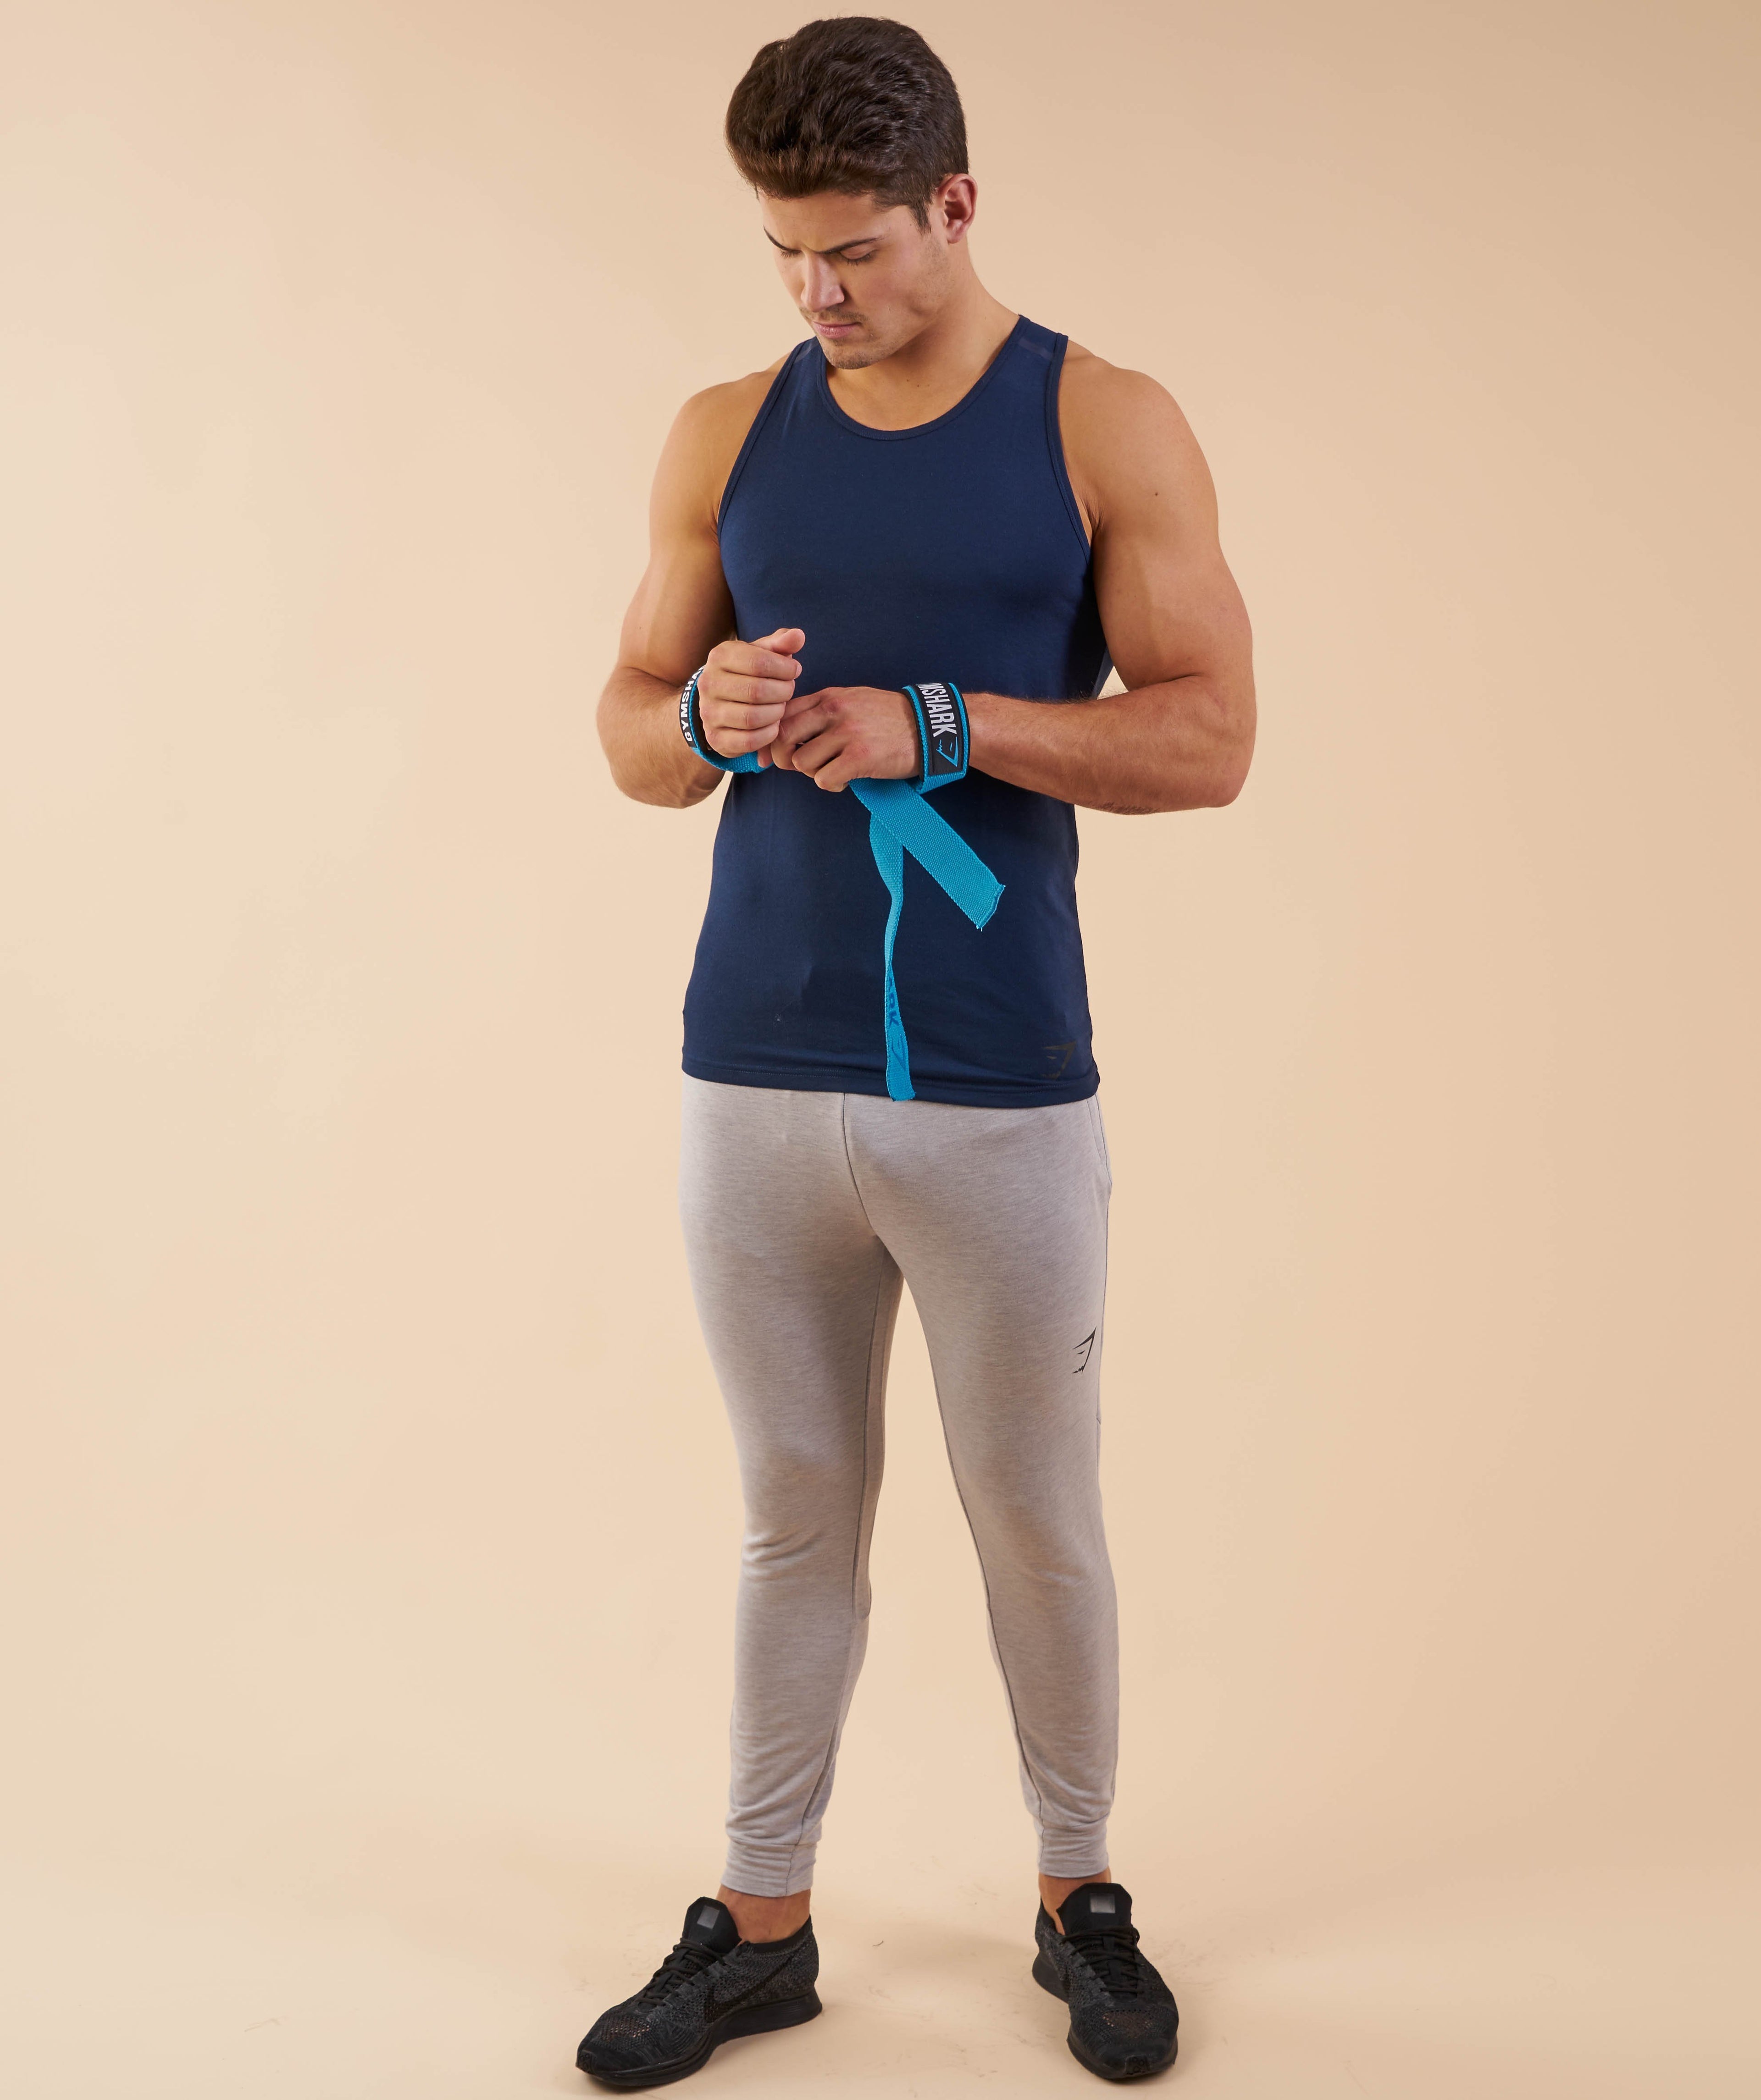 Padded Lifting Straps in Blue - view 3